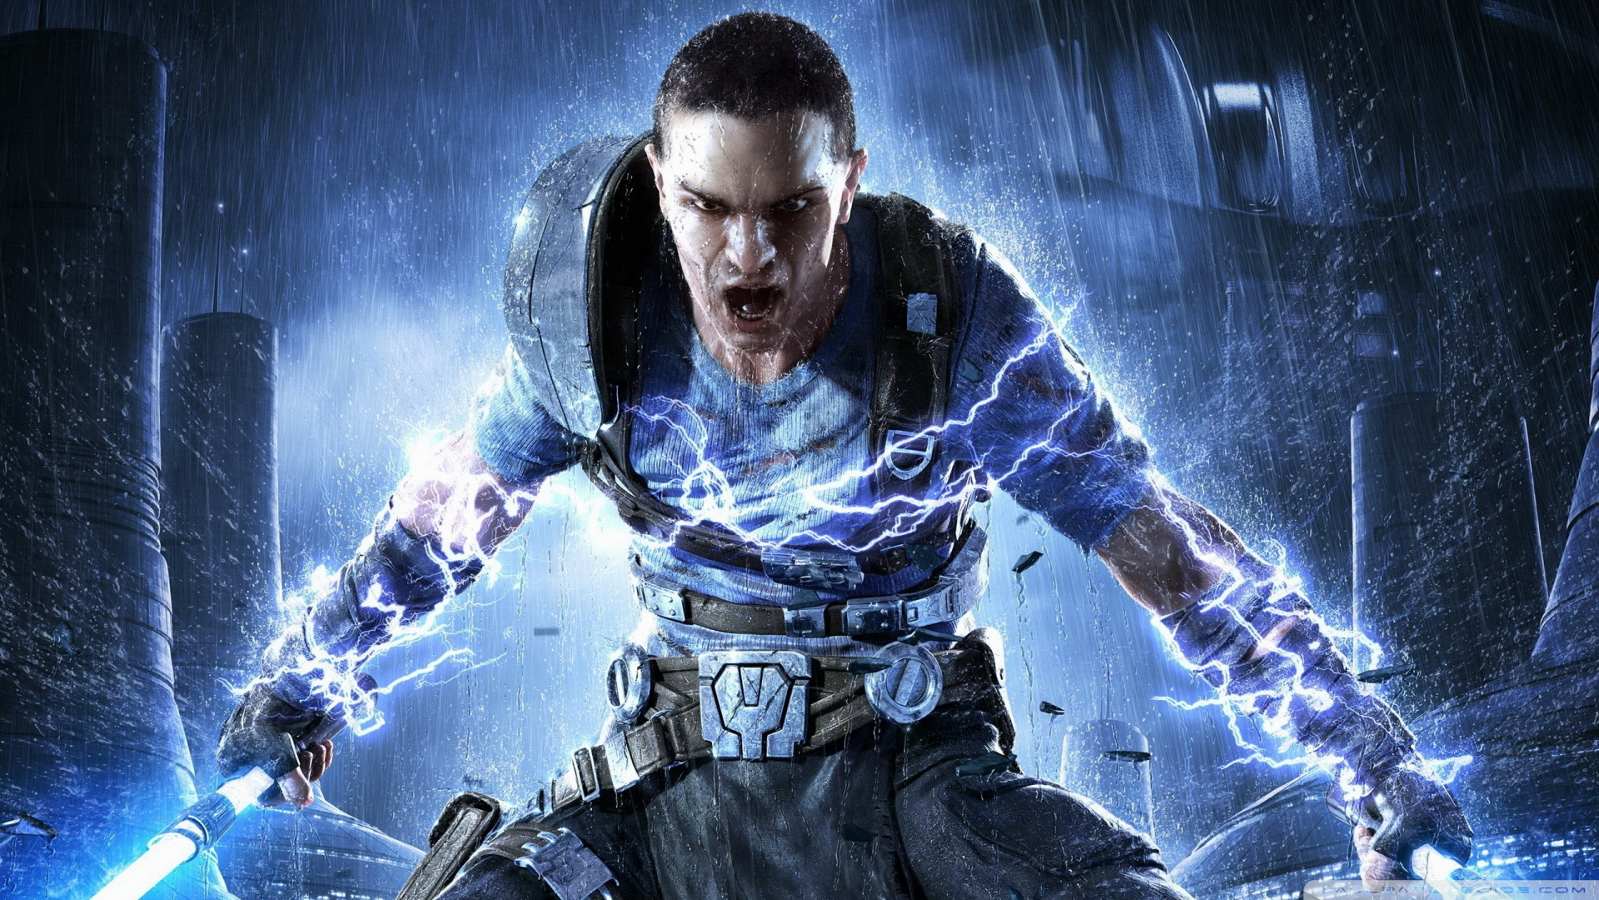 Force Unleashed promo pic.